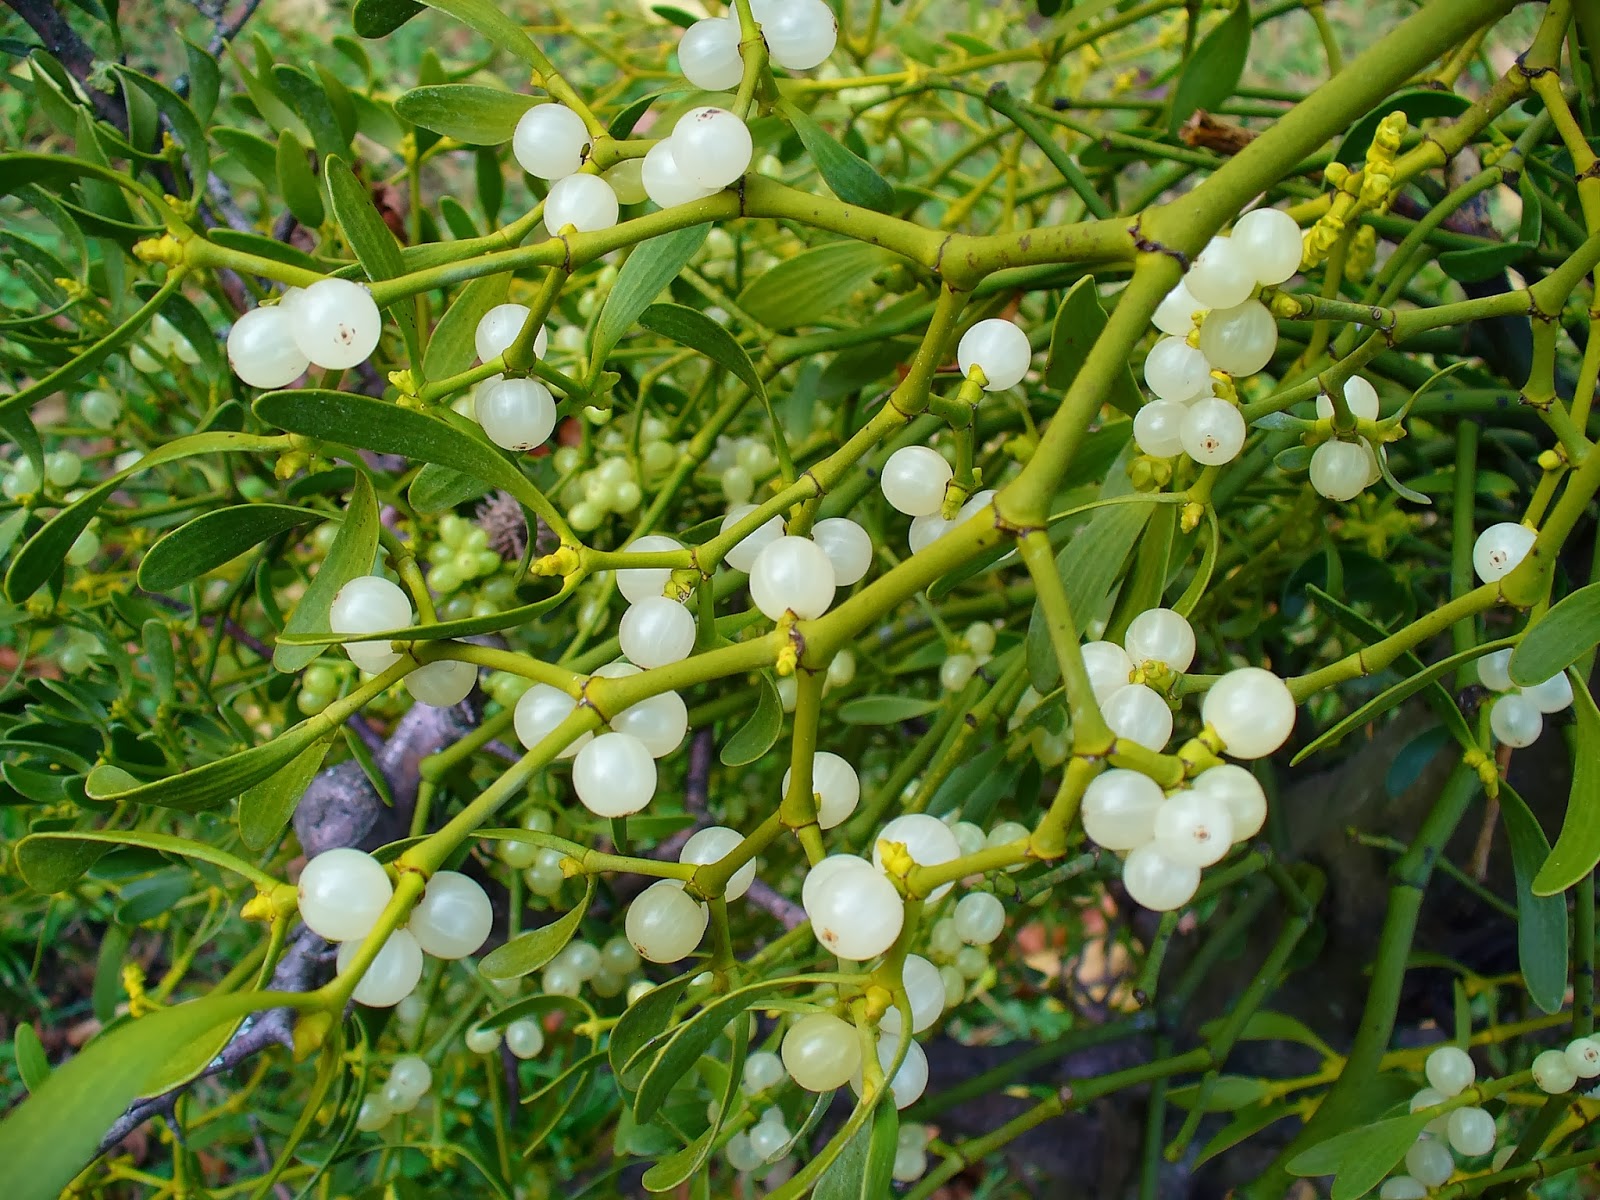 The characteristic leaves and white fruits of V. album, which contain one seed embedded in very sticky, glutinous pulp. Photo: Llez.